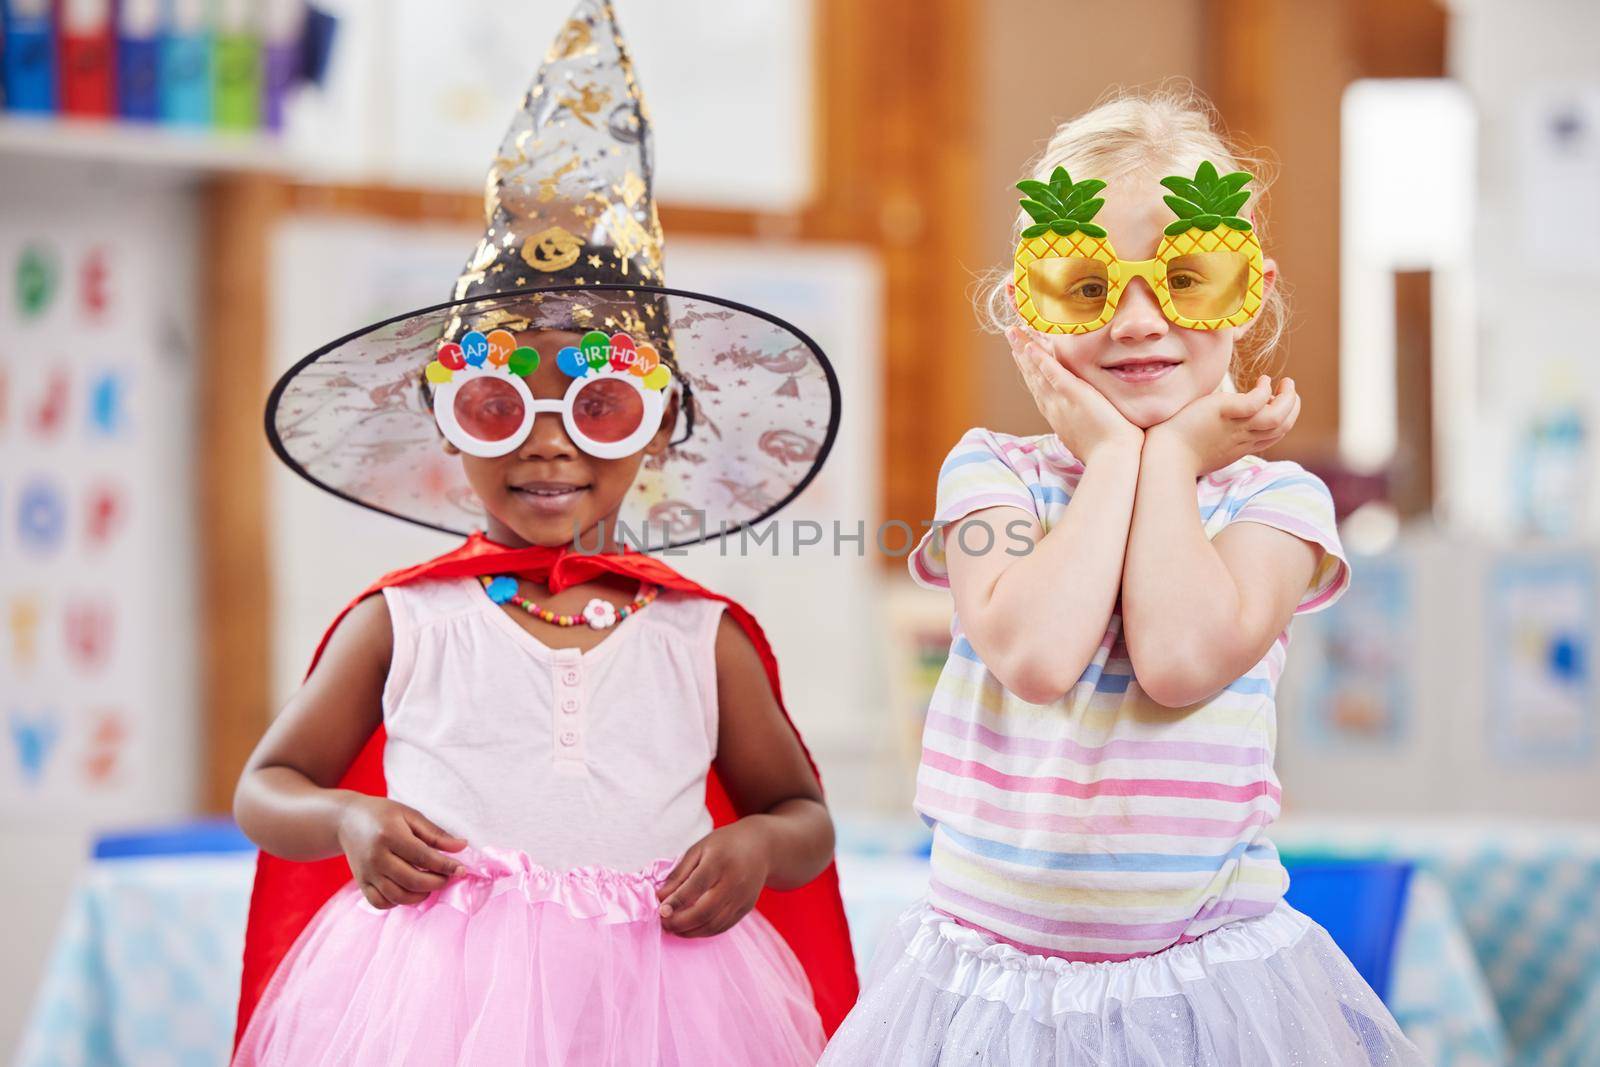 Shot of two girls playing dress-up in class.